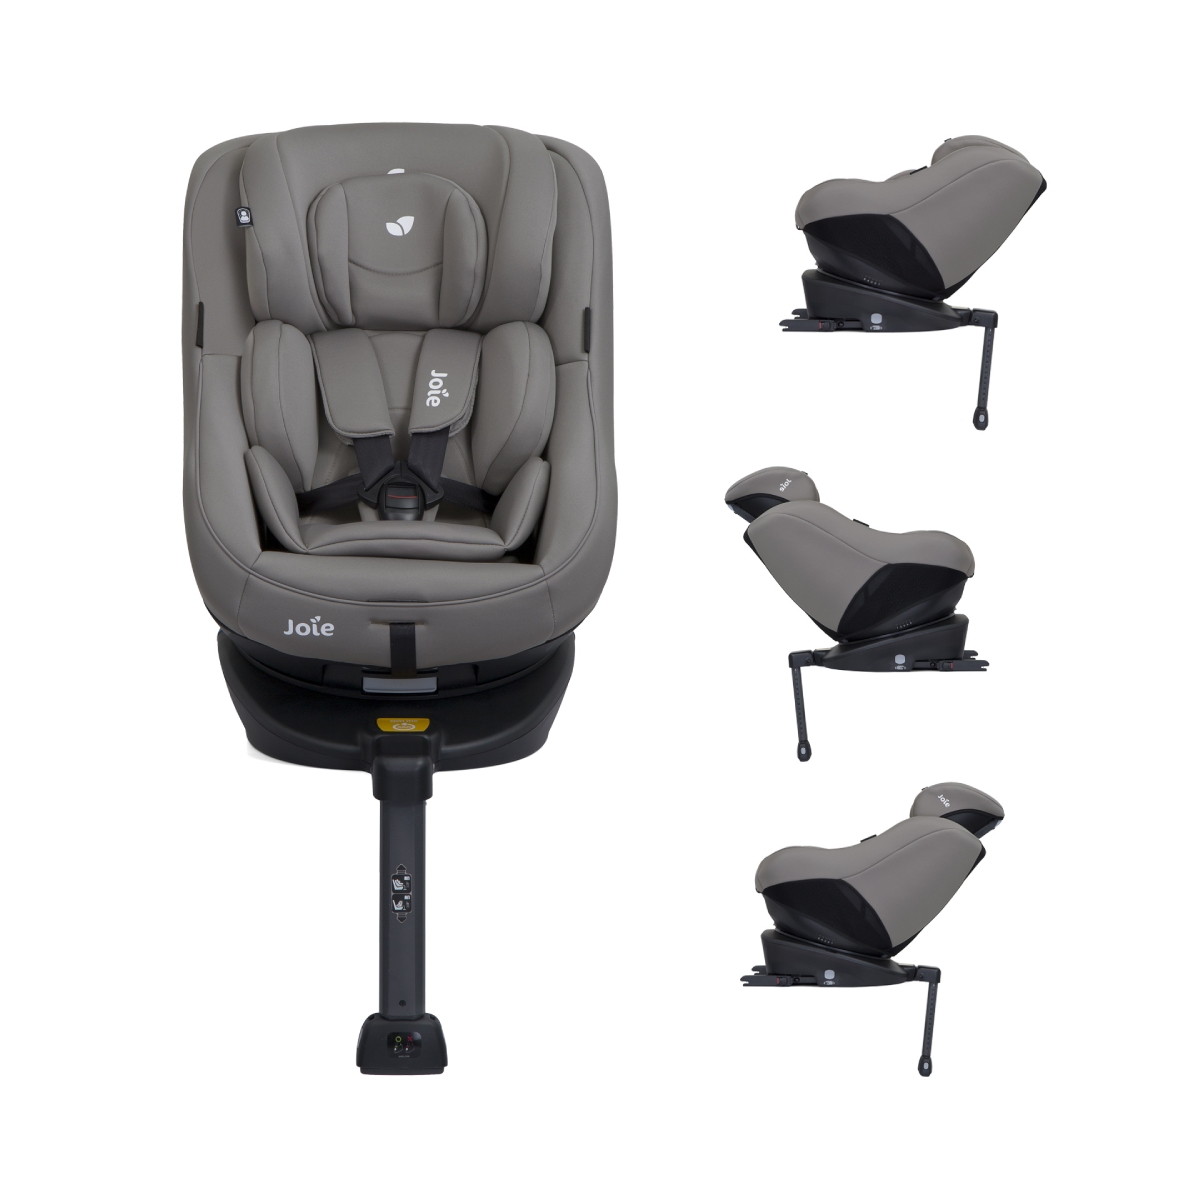 Joie 360 Spin Baby to Toddler Car Seat - Grey Flannel